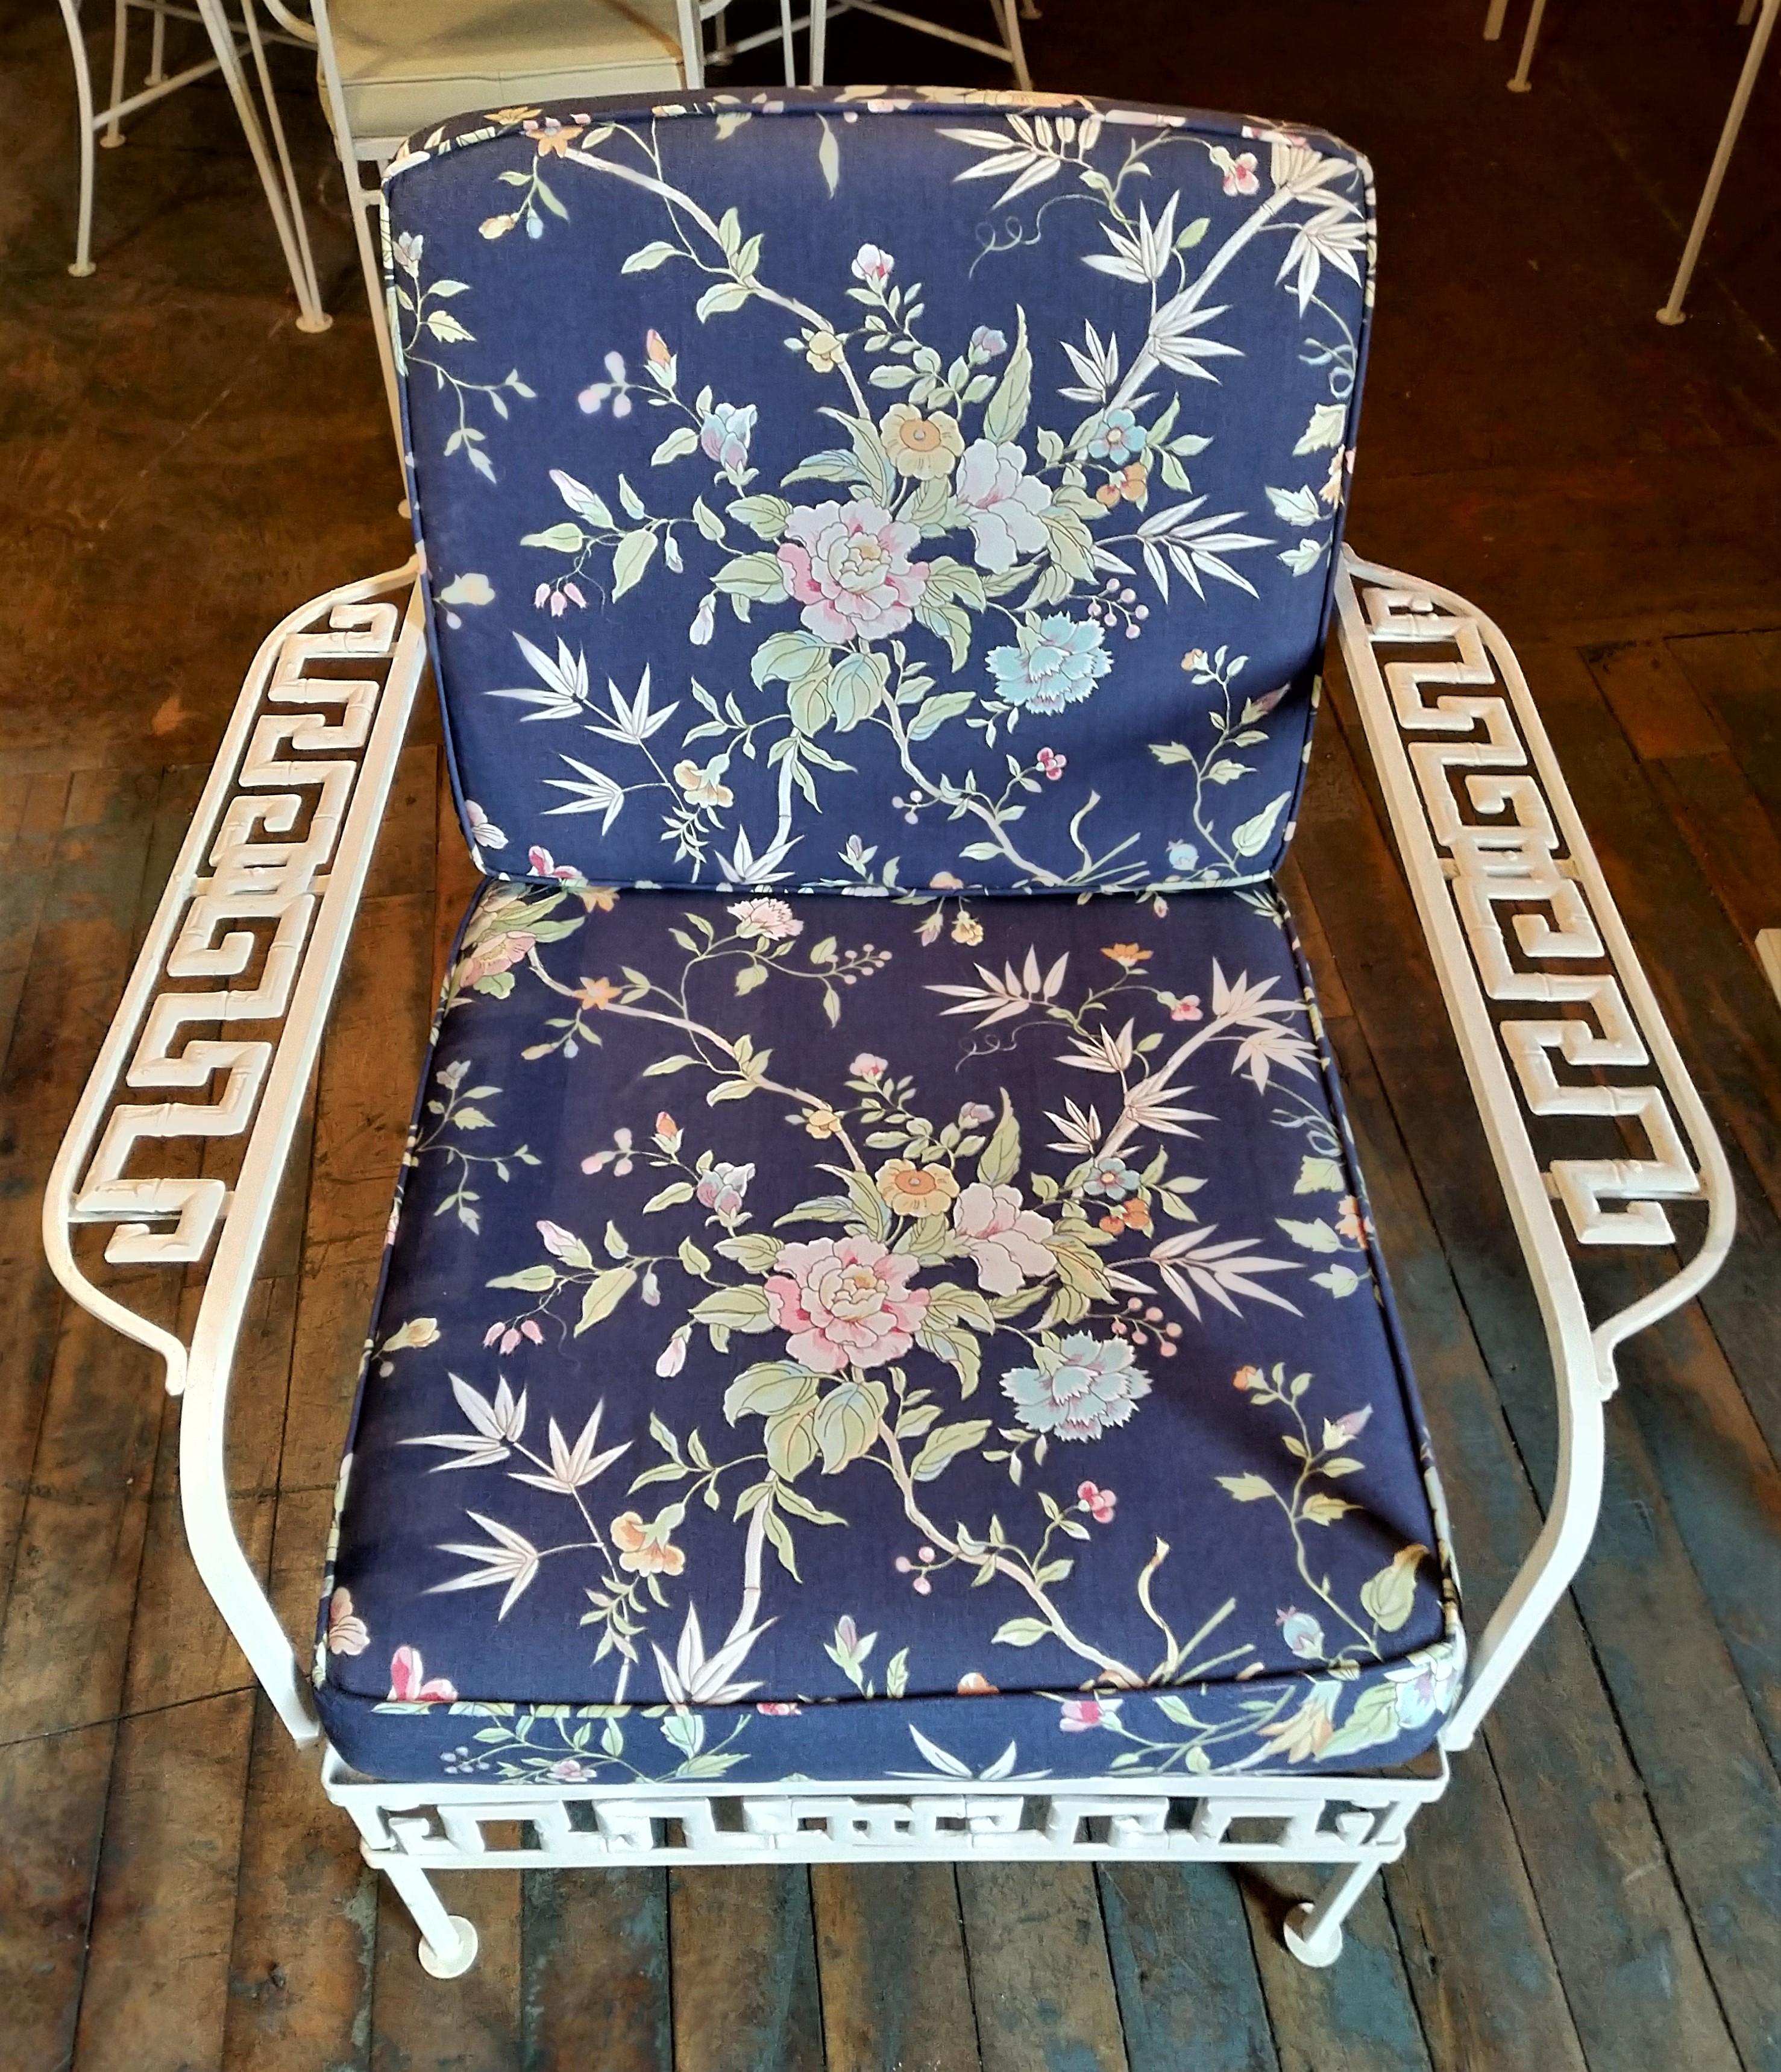 Vintage 1960's Molla cast aluminum armchairs & ottoman with greek key pattern
Dimensions of stationary chair: 29 1/2